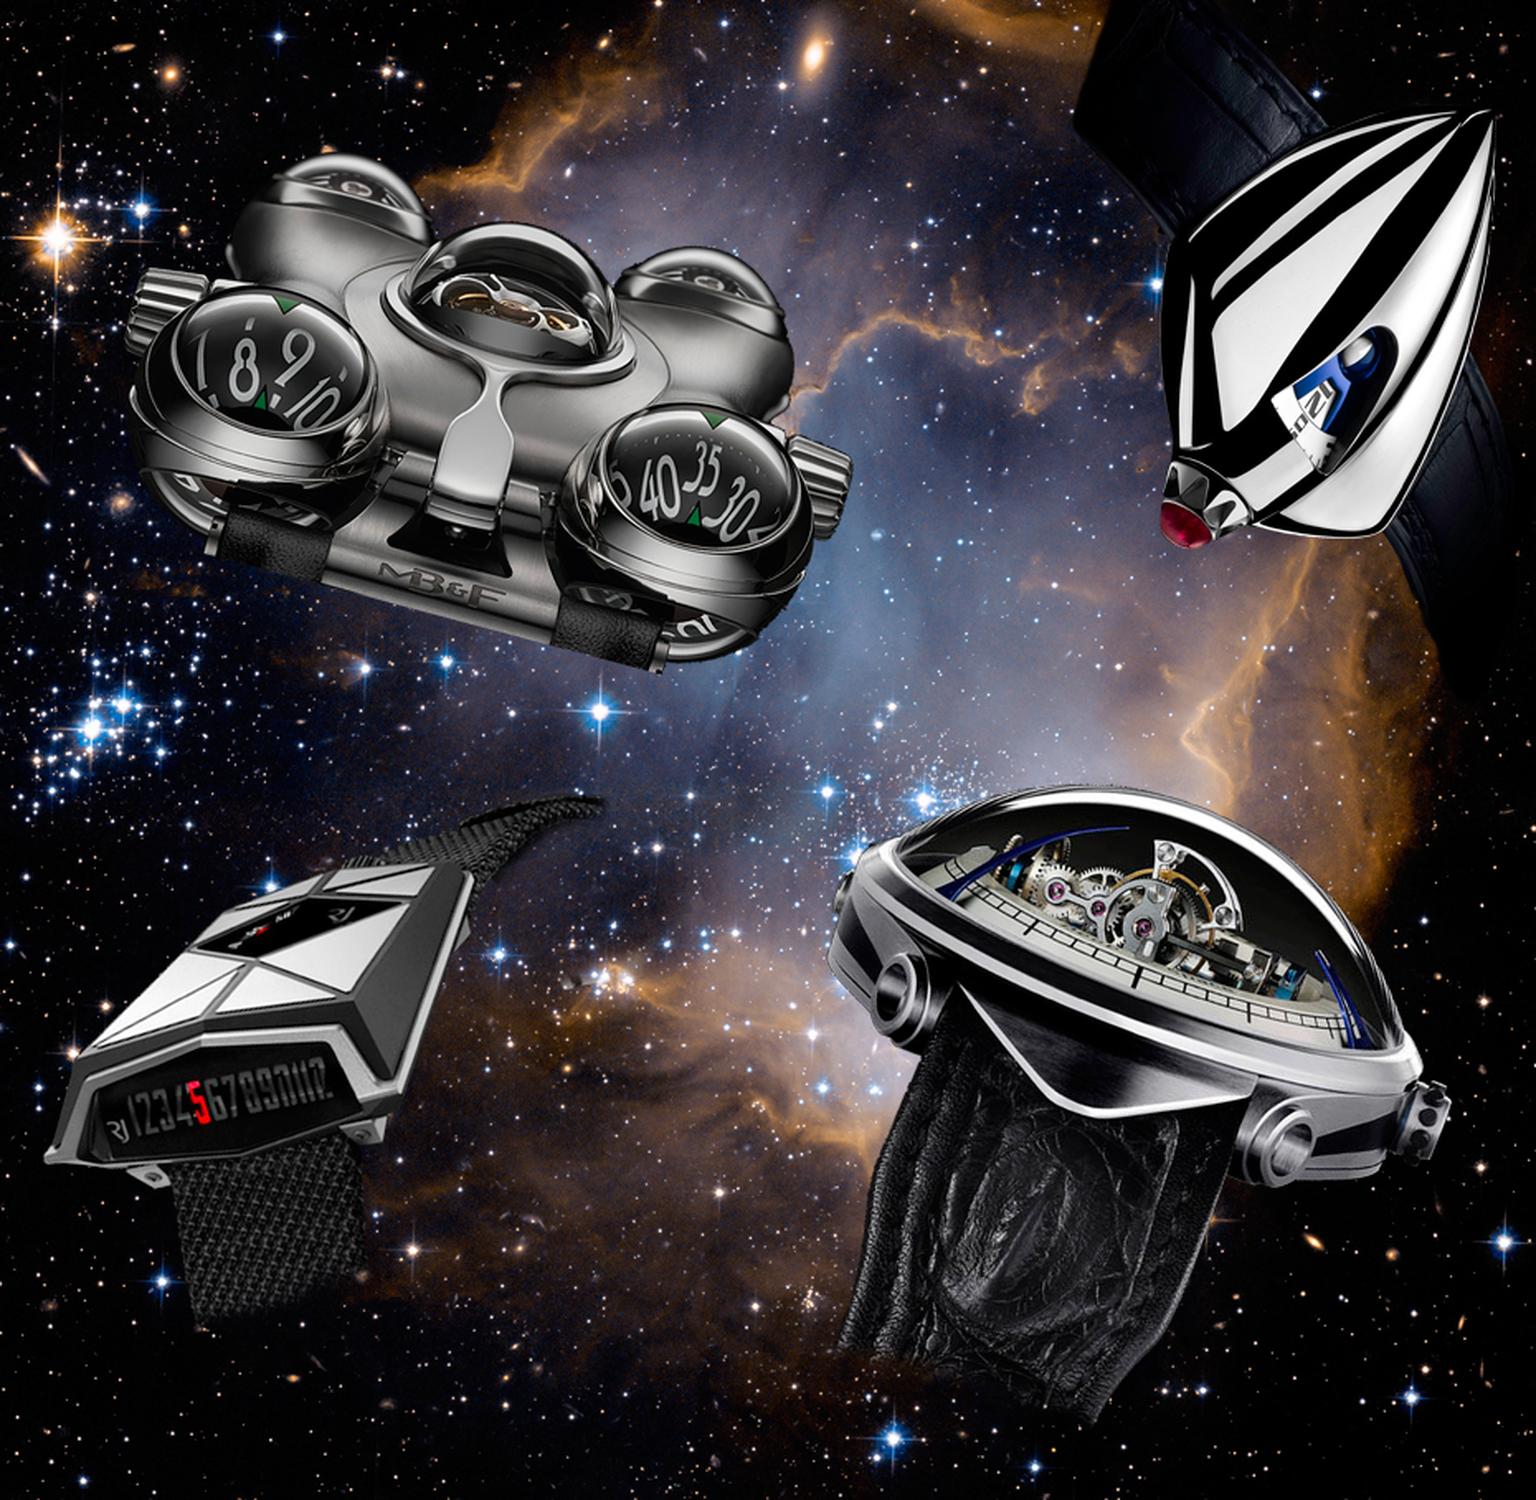 Fans of horology and science fiction can pursue both passions with these extraordinary vessels designed to navigate the far reaches of outer space. From left to right: MB&F HM6 Space Pirate, de Bethune Dream Watch 5, Vianney Halter Deep Space 9; Romain Je